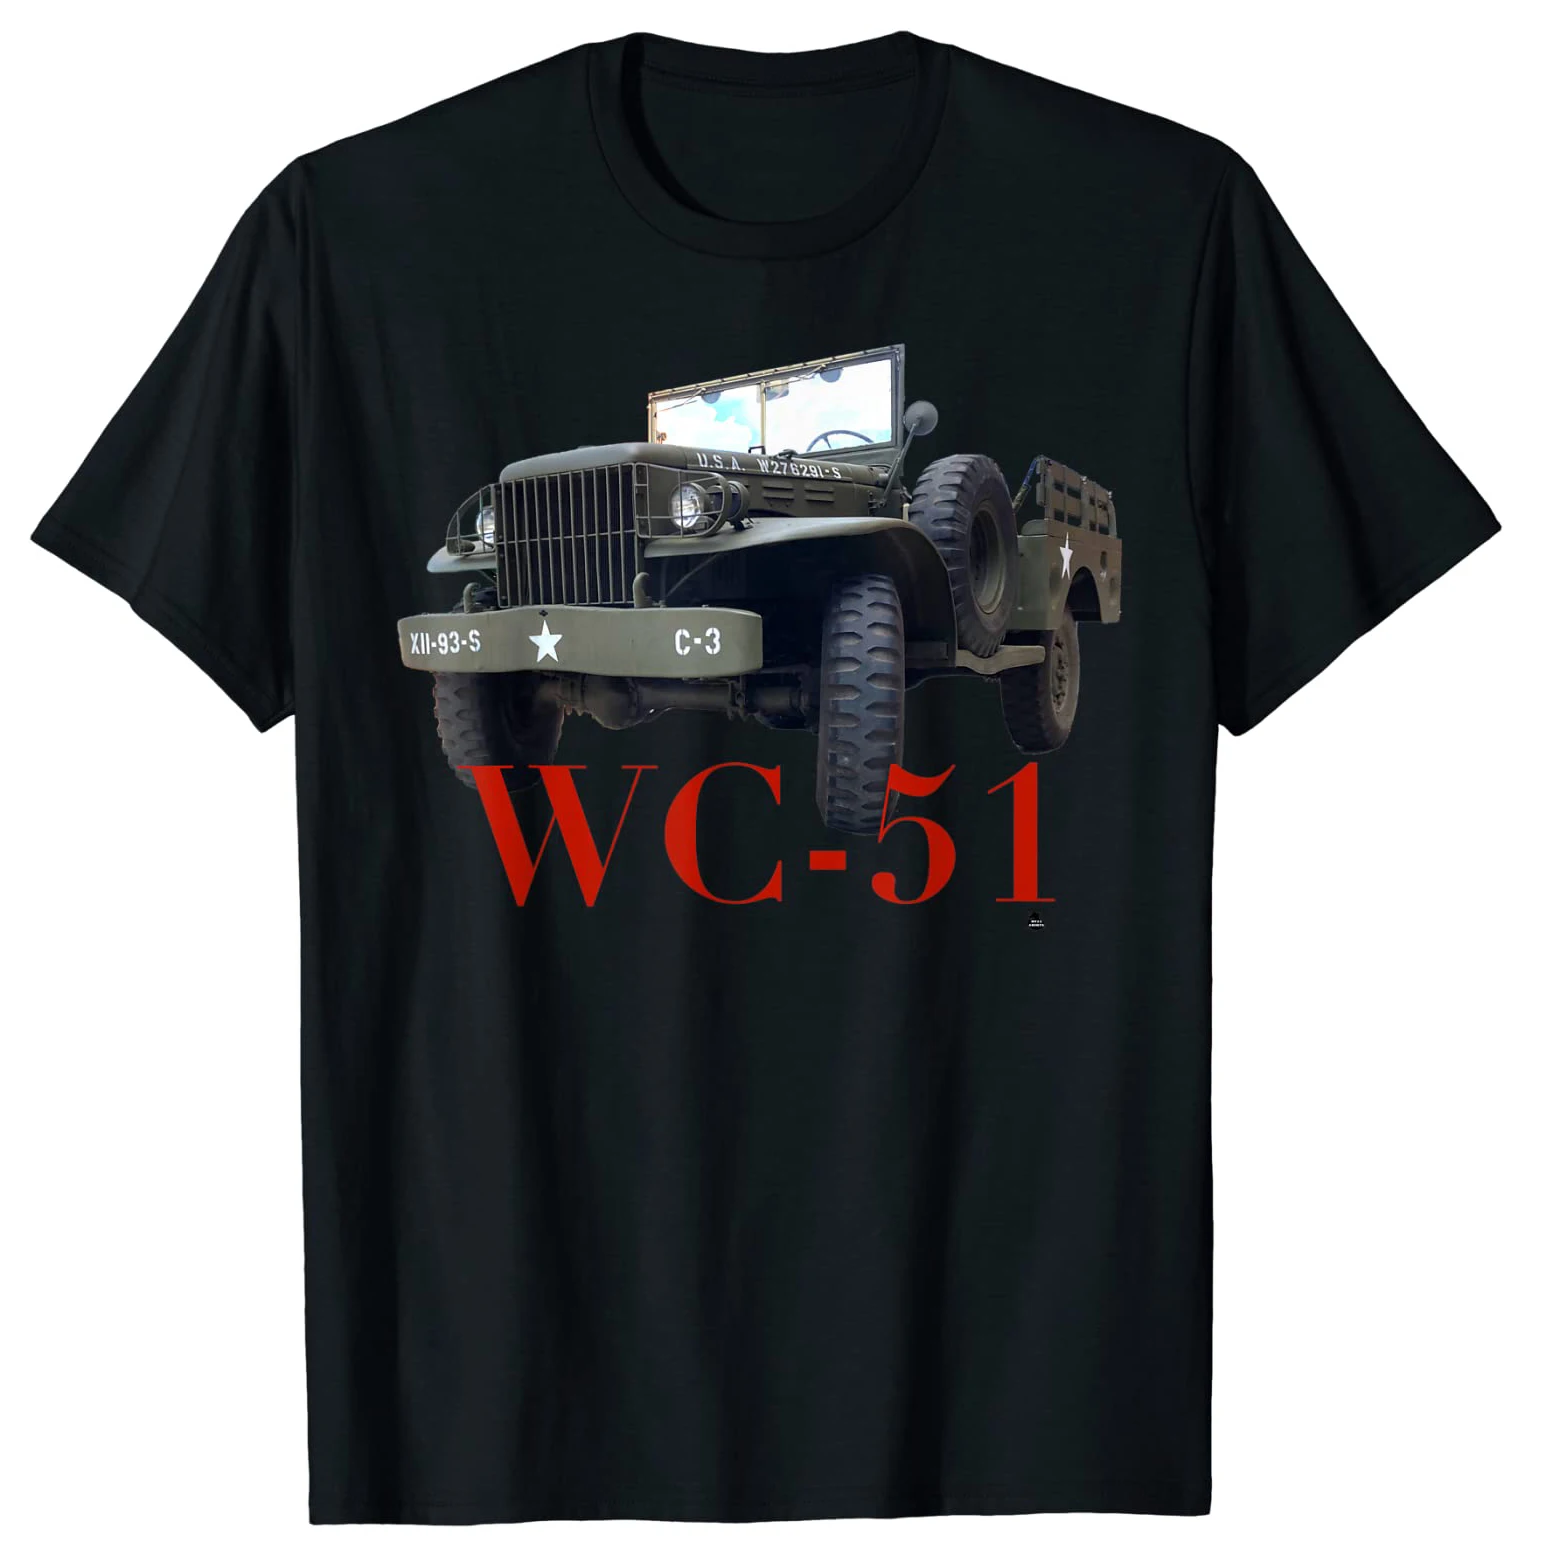 

WWII America Army WC-51 Military Truck T-Shirt. Premium Cotton Short Sleeve O-Neck Mens T Shirt New S-3XL